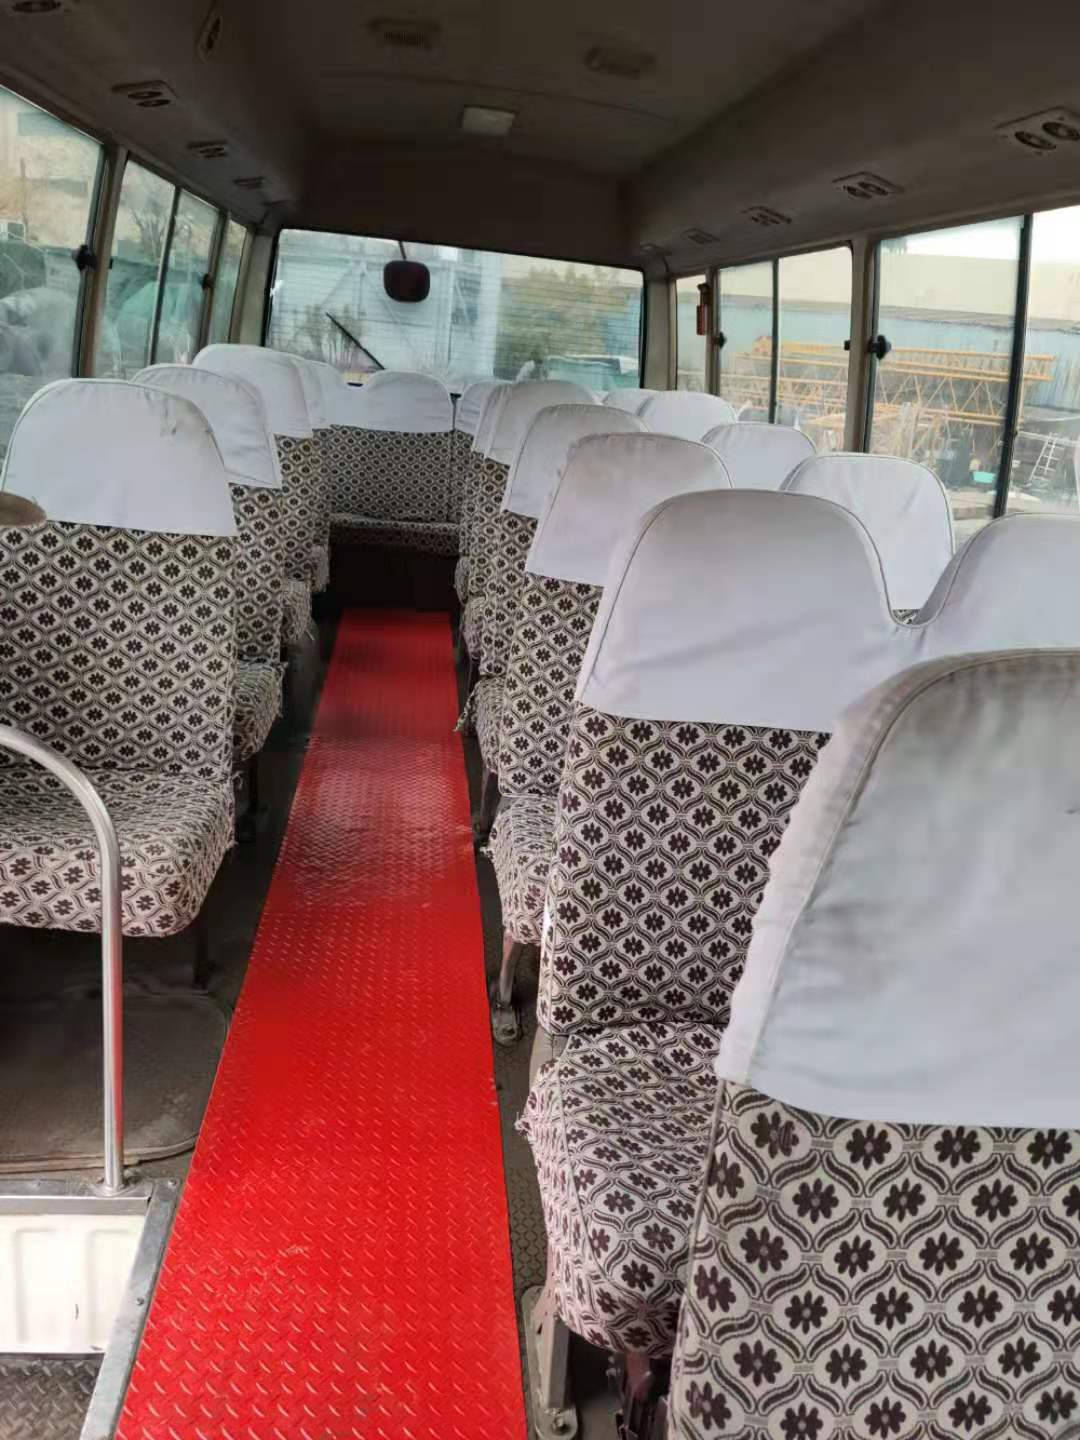 Buy cheap Japan Brand price Used LHD coaster bus used Luxury coach bus for sale second hand diesel/petrol car hot sale product